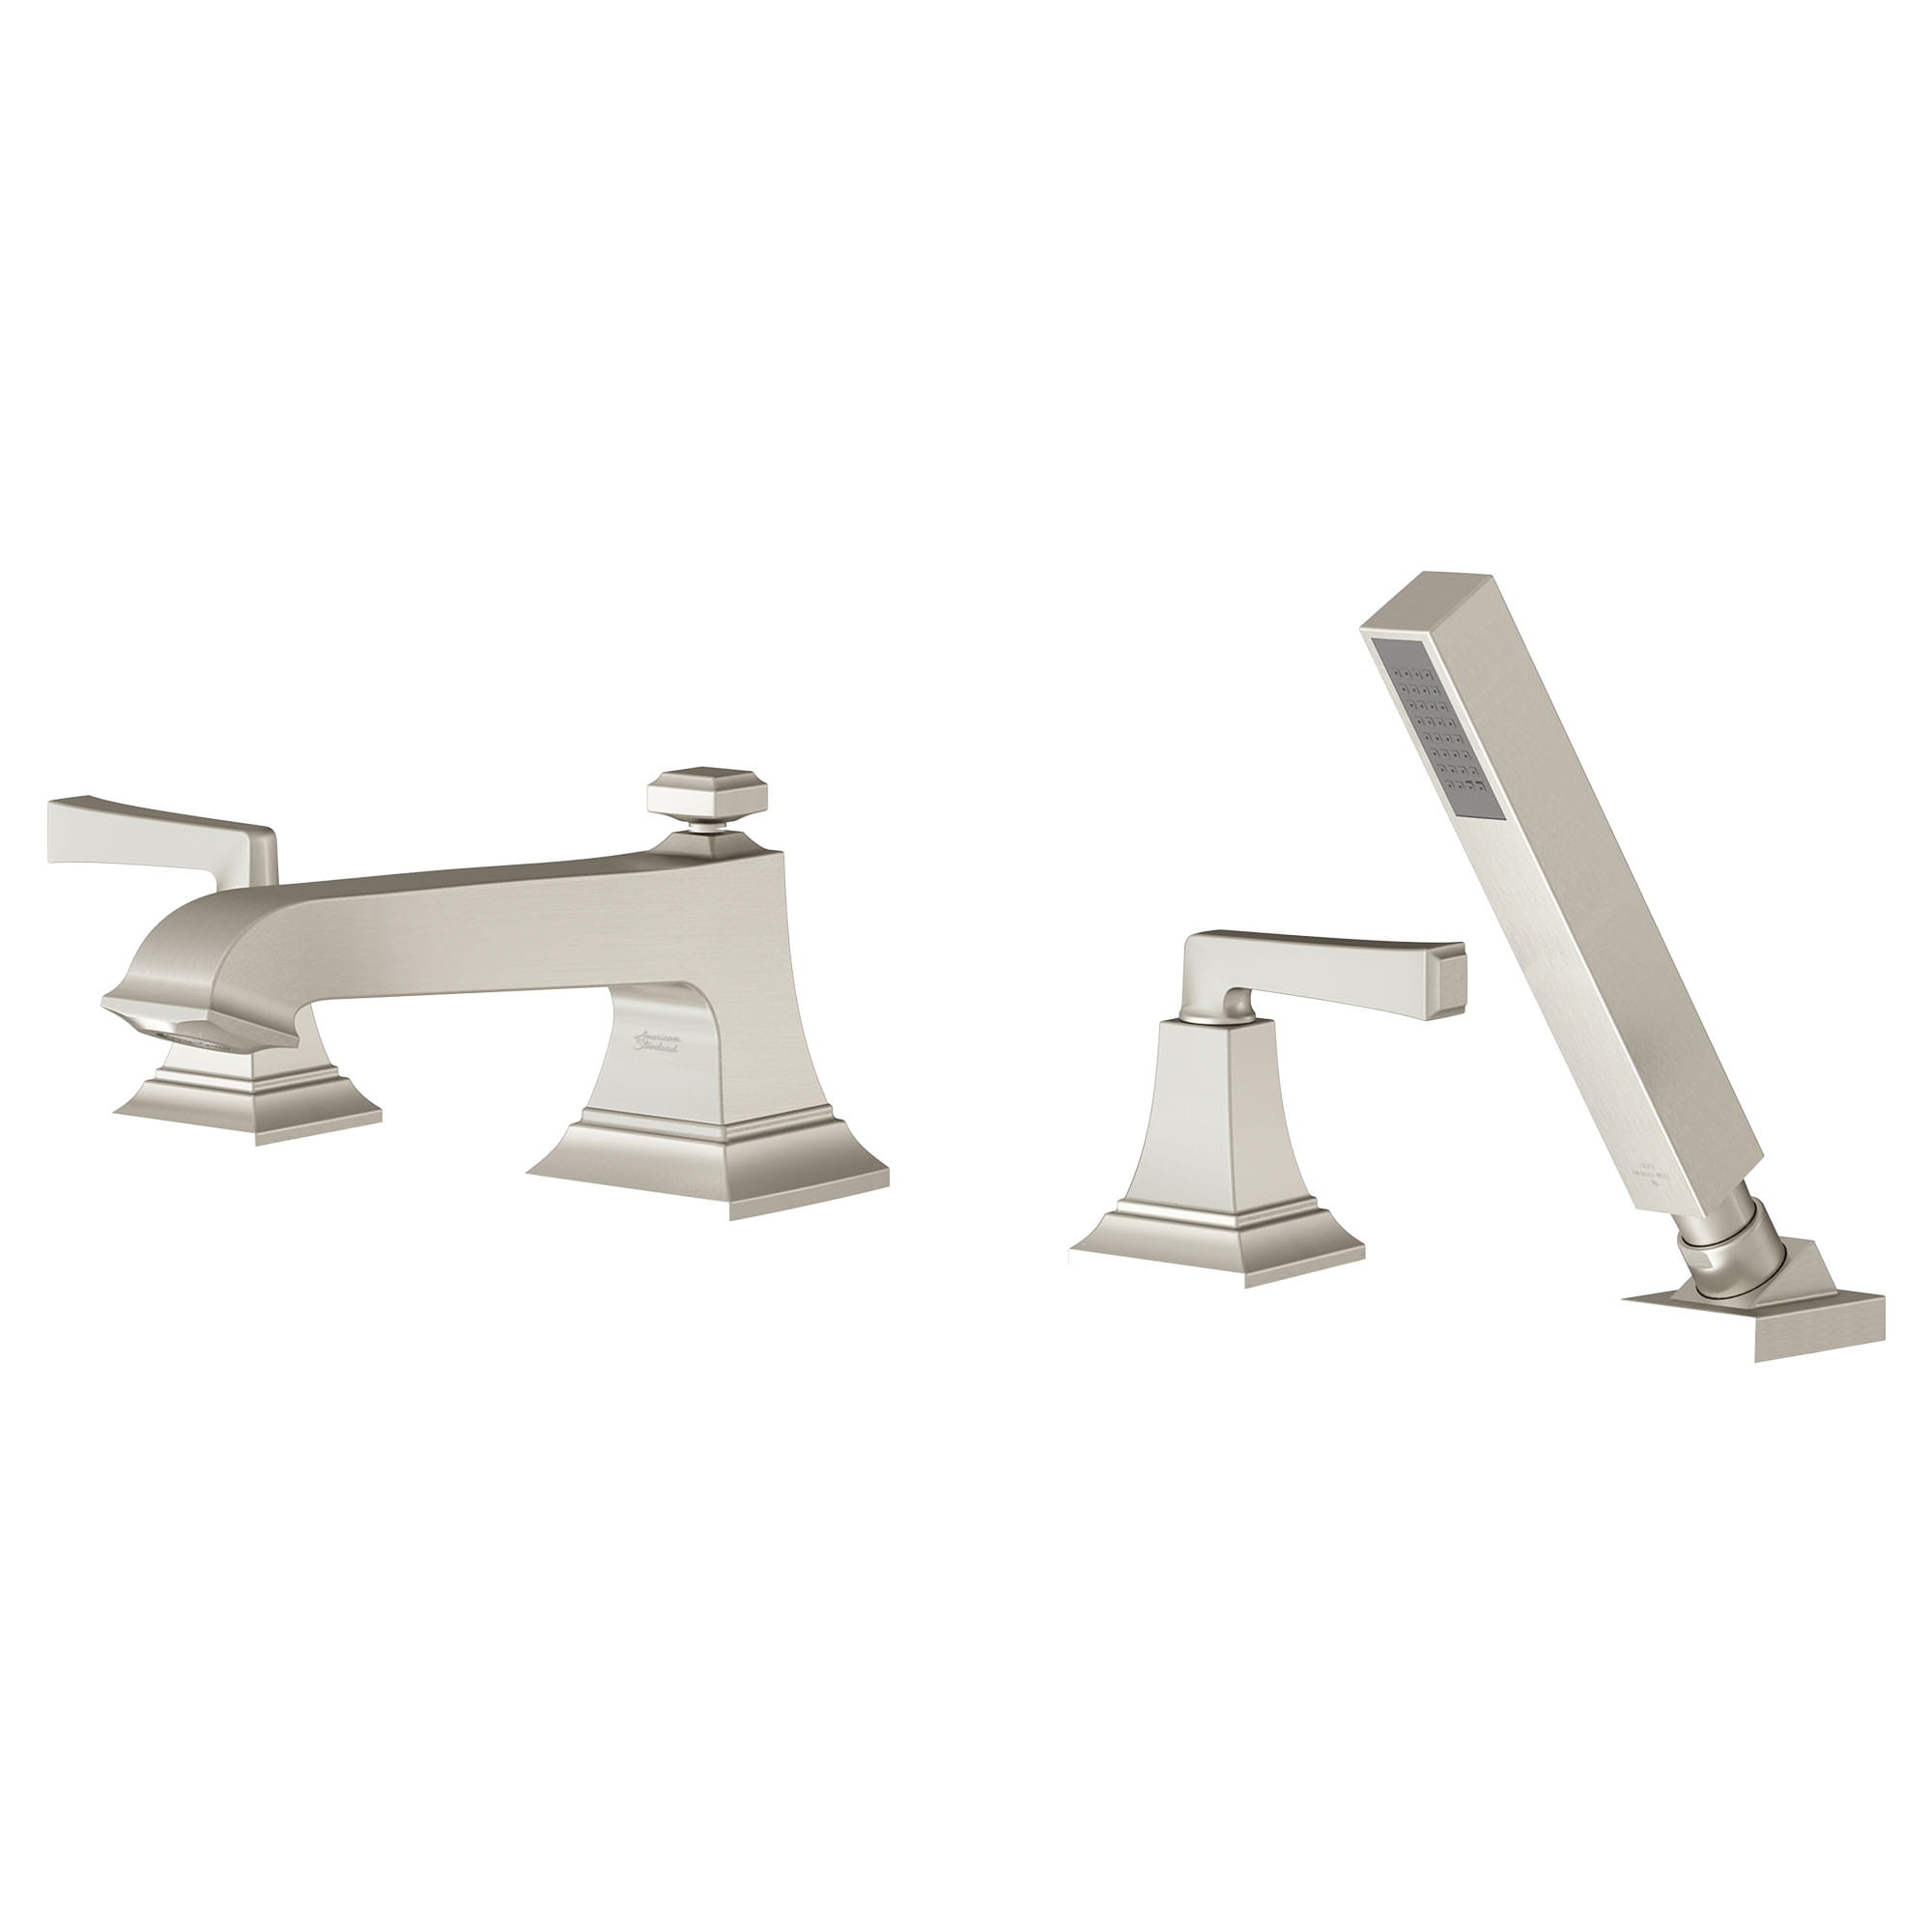 Town Square S Bathub Faucet With Lever Handles and Personal Shower for Flash Rough in Valve   BRUSHED NICKEL